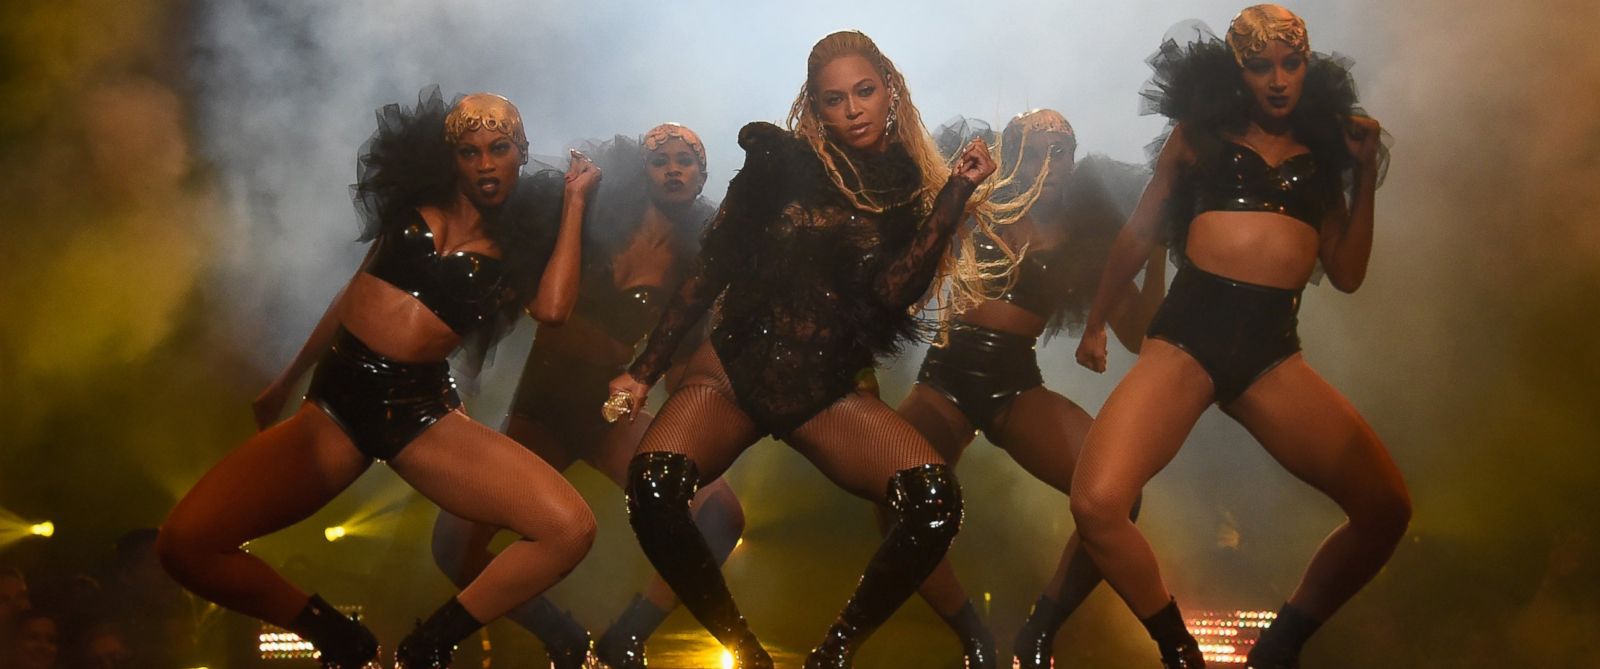 all night beyonce mp3 download